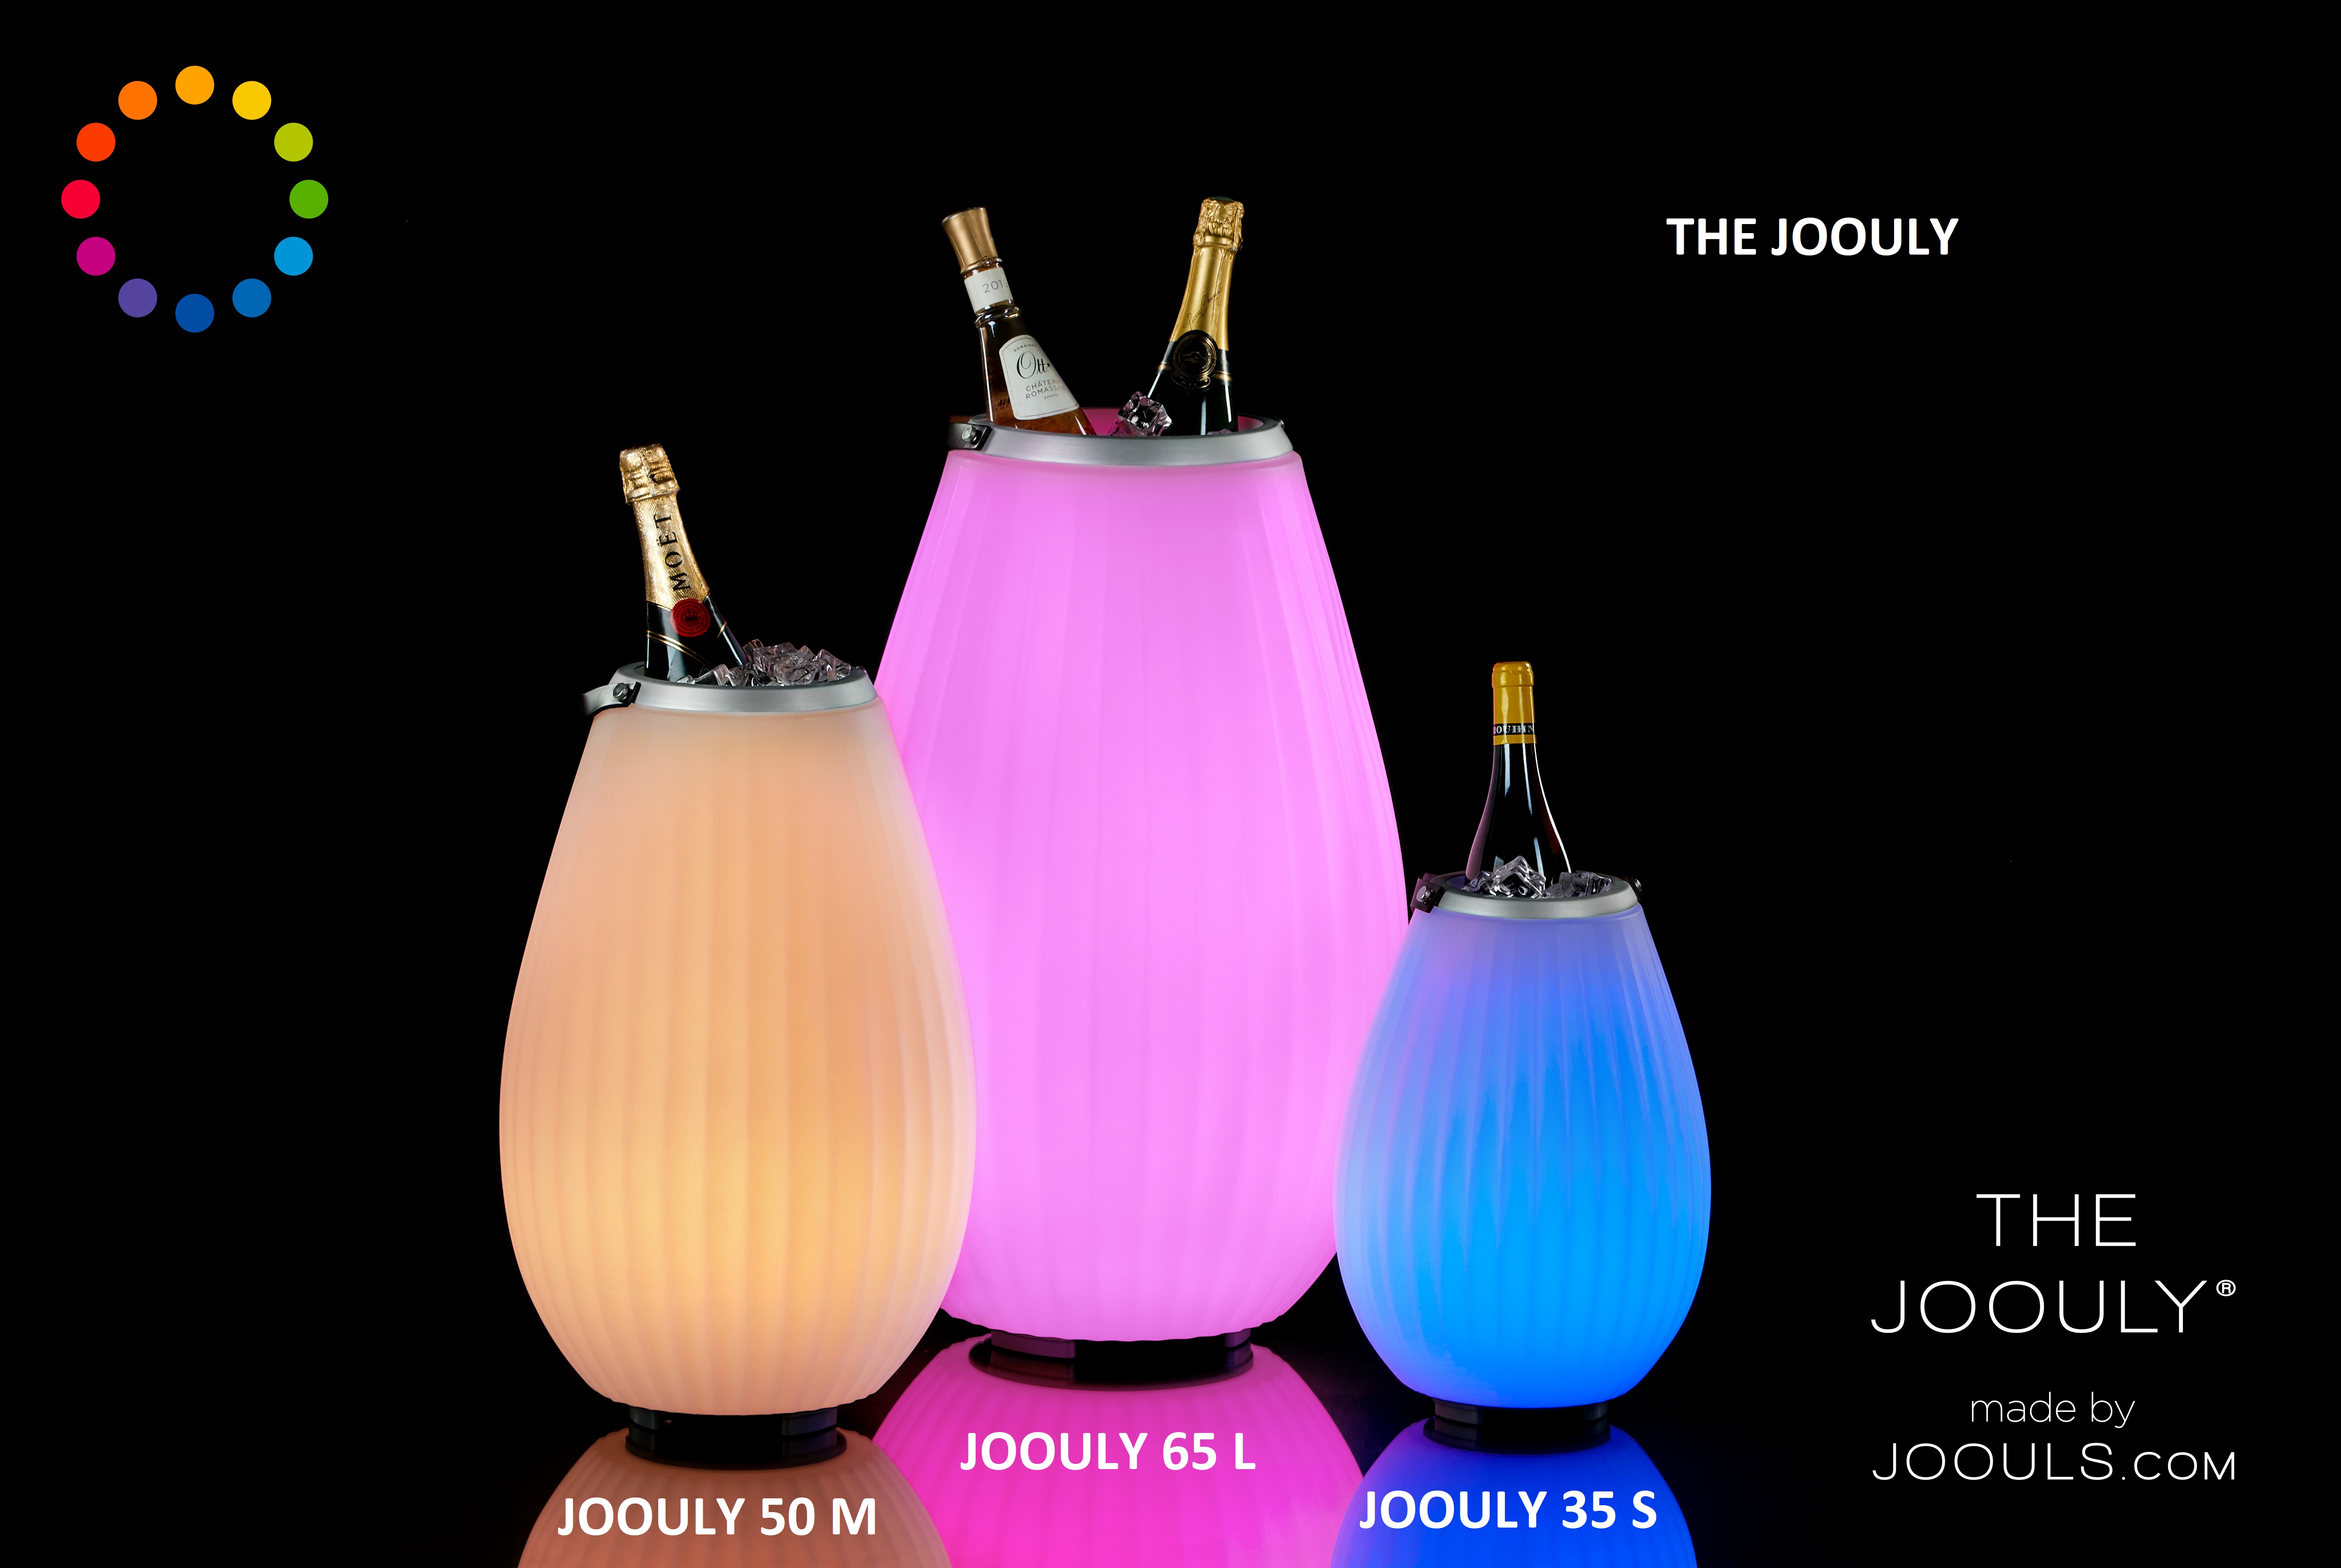 The Joouly 35